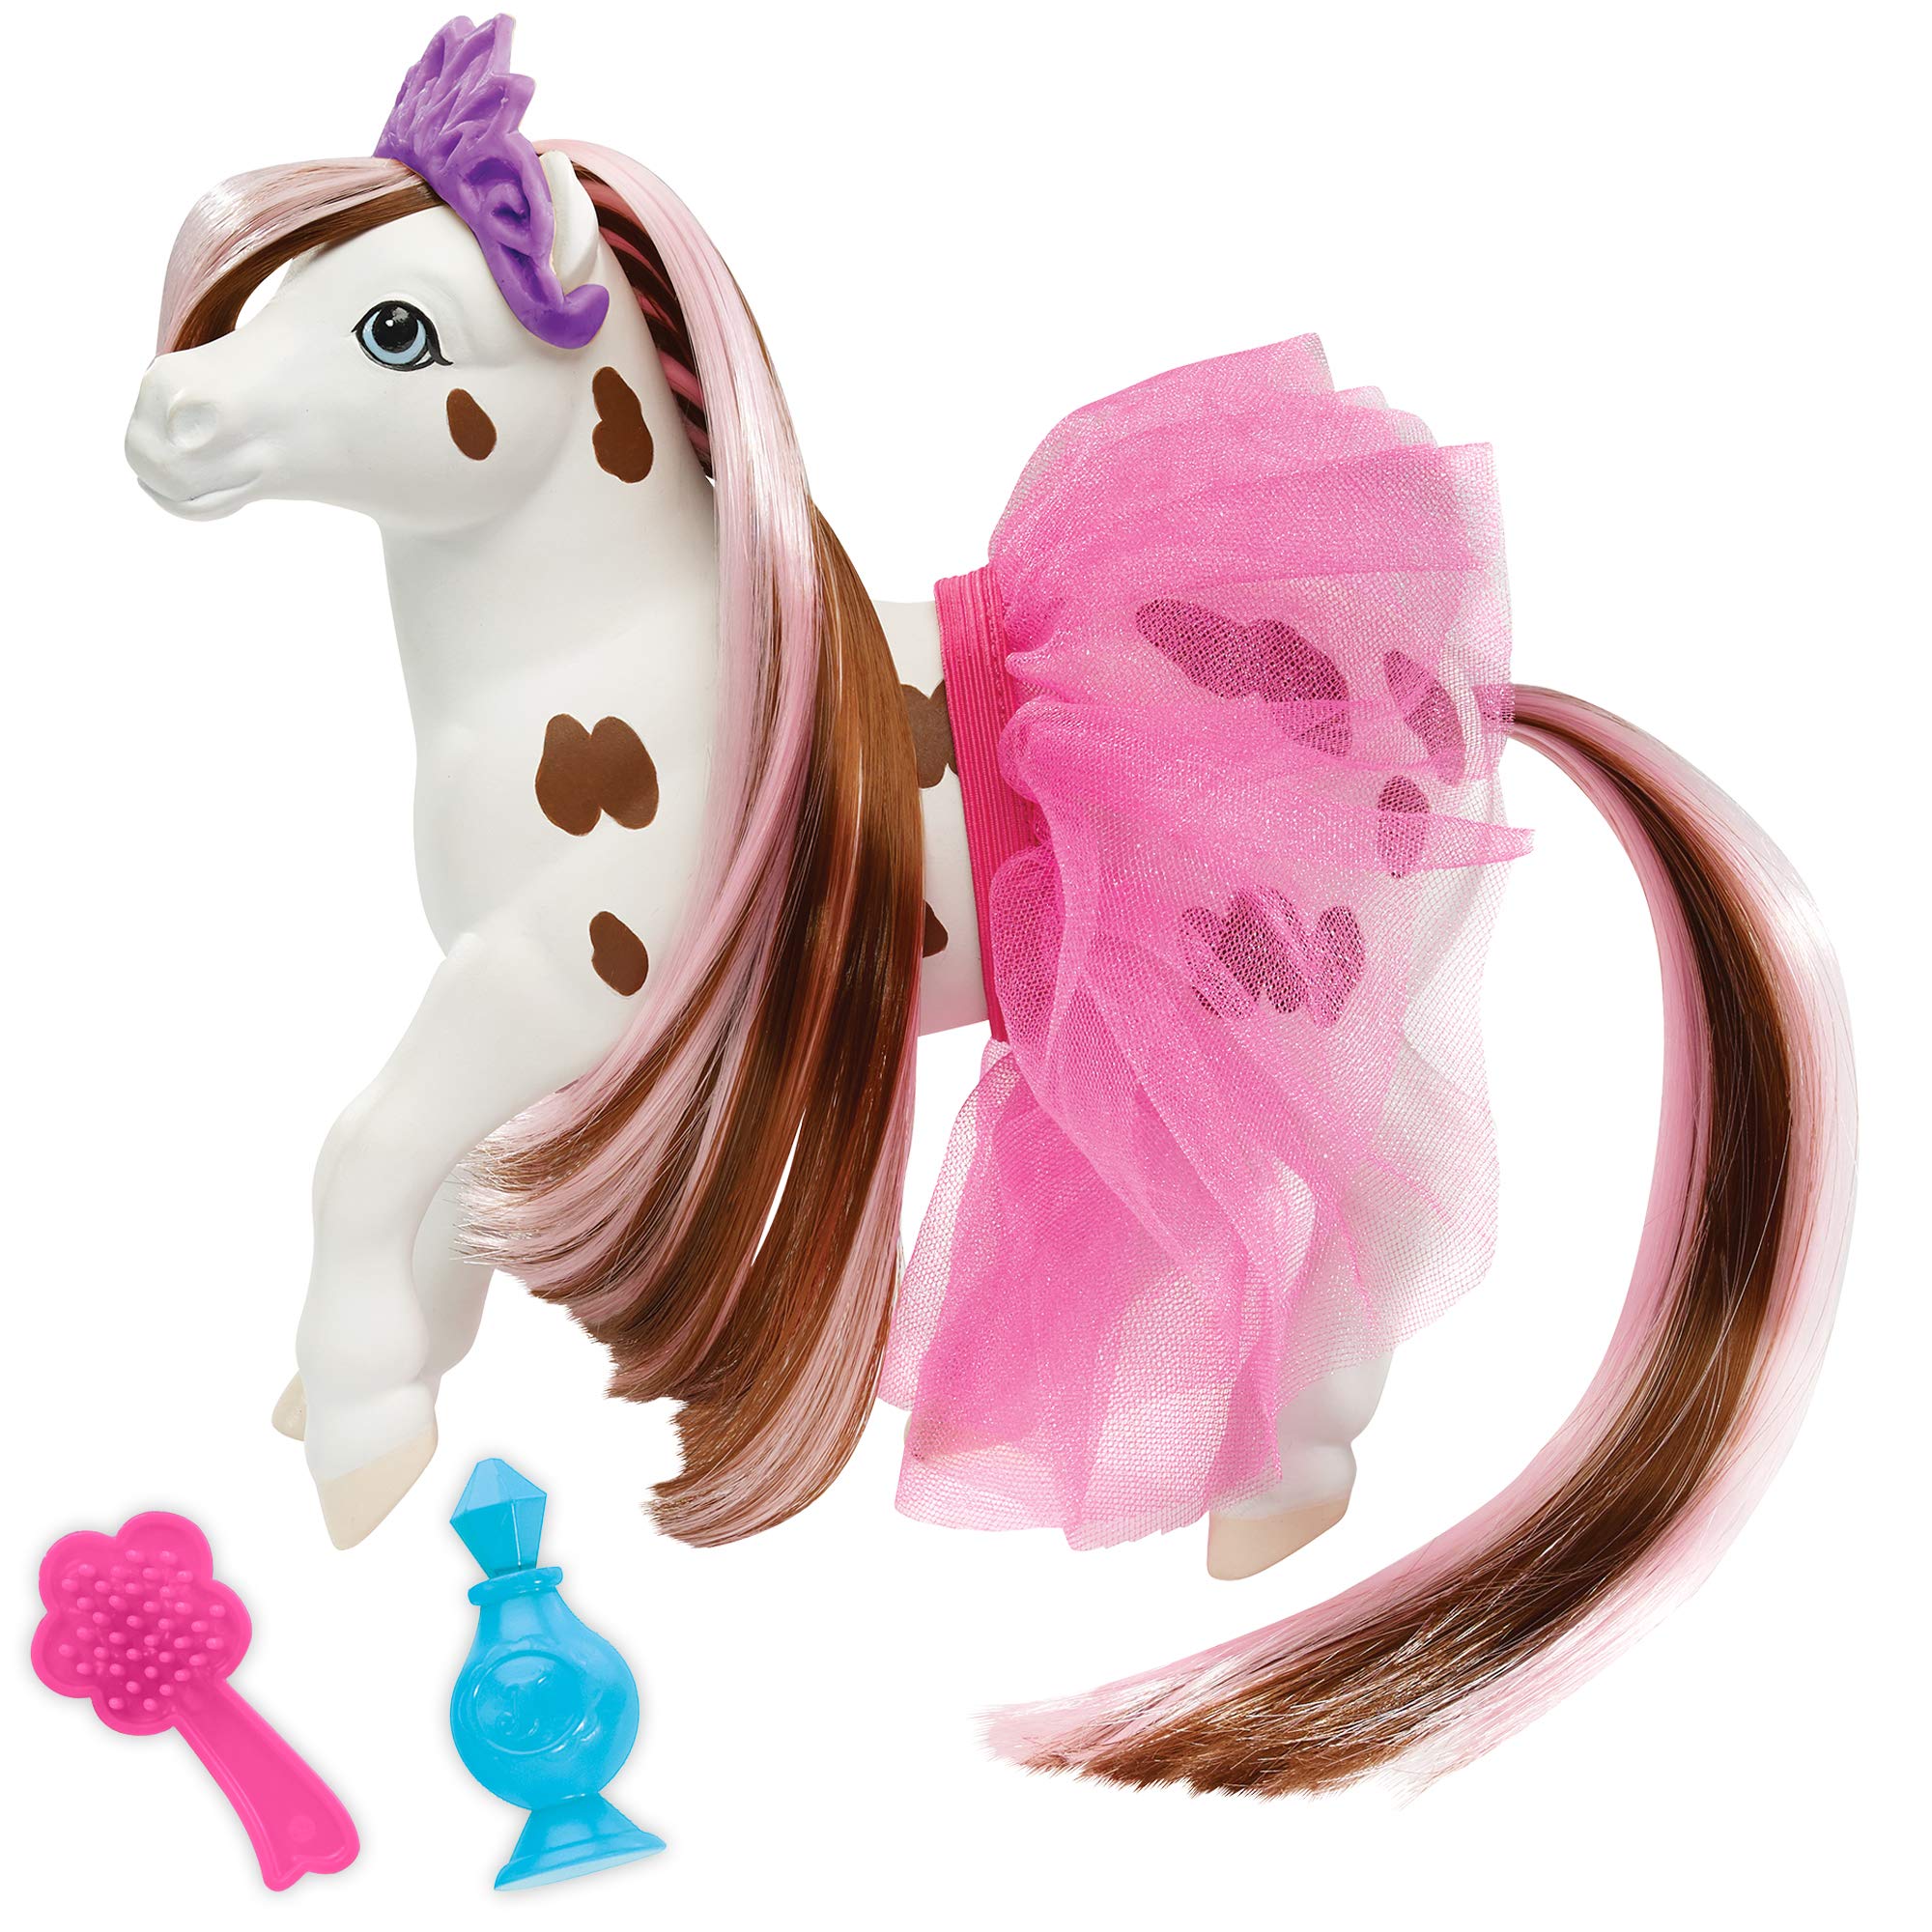 Breyer Horses Color Changing Bath Toy | Blossum The Ballerina Horse | Brown/ White with Surprise Pink Color | 7